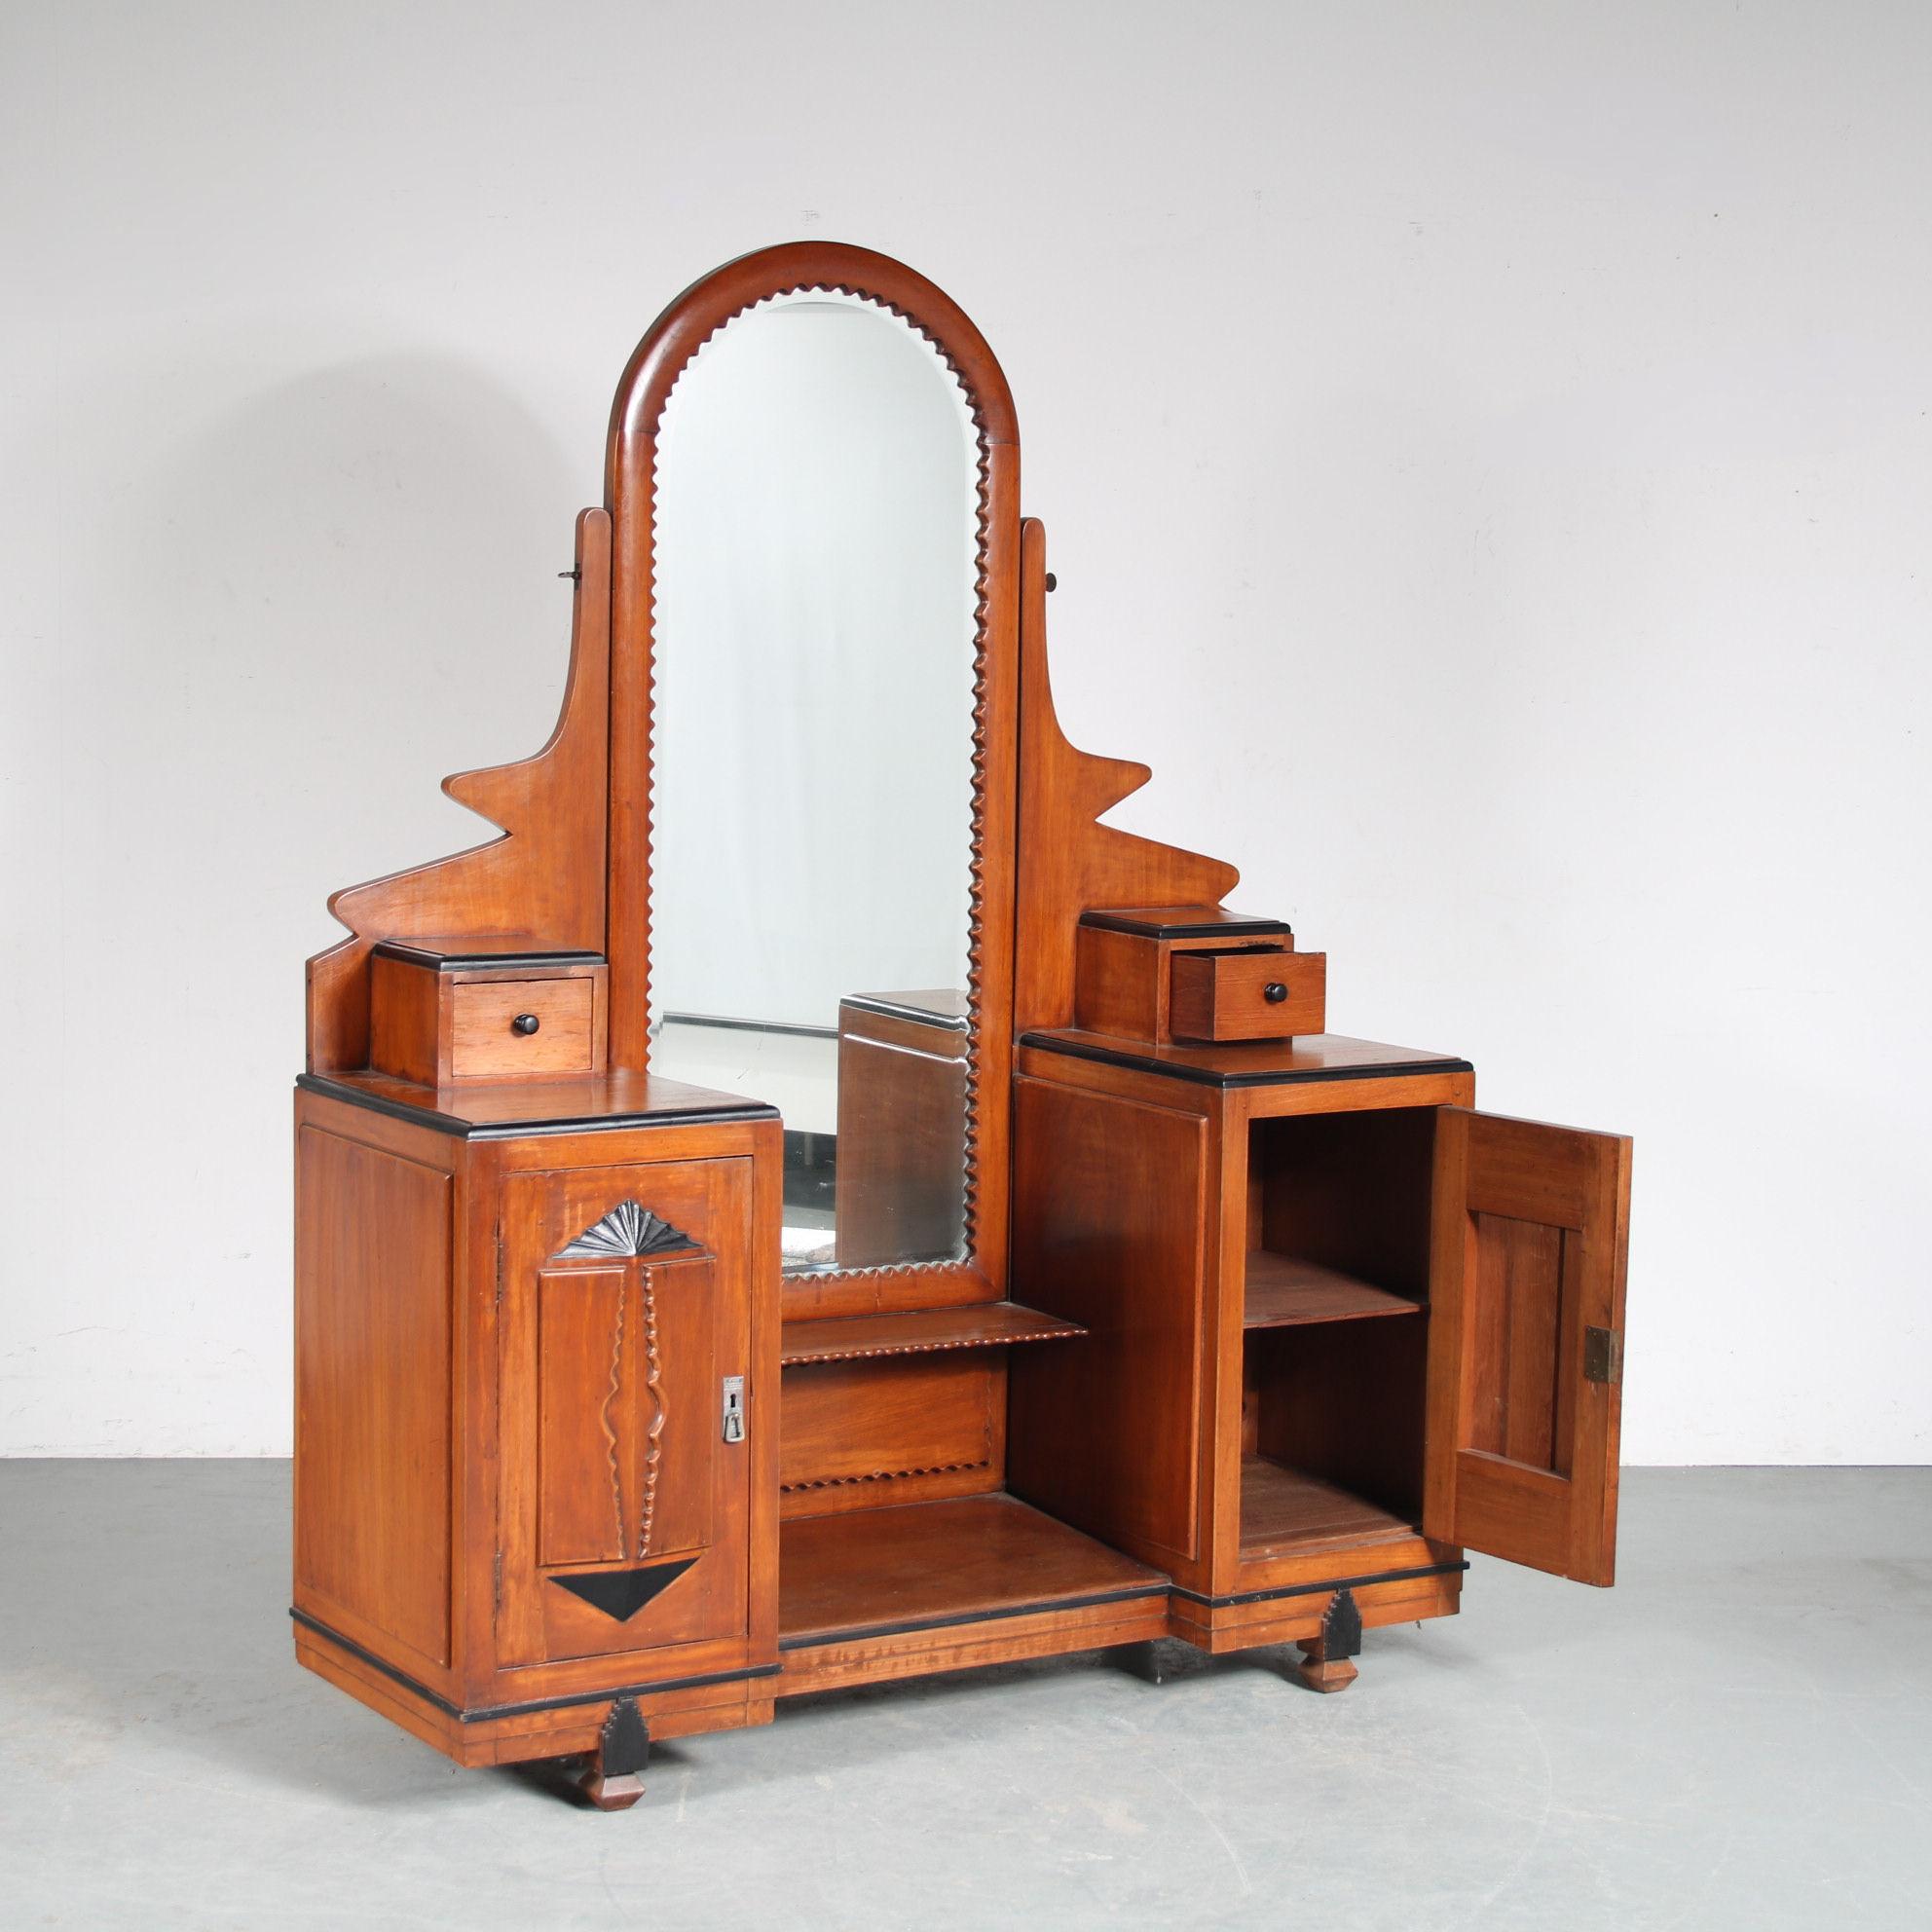 Indonesian Colonial Dressing Table in Amsterdam School Style, Indonesia, 1920